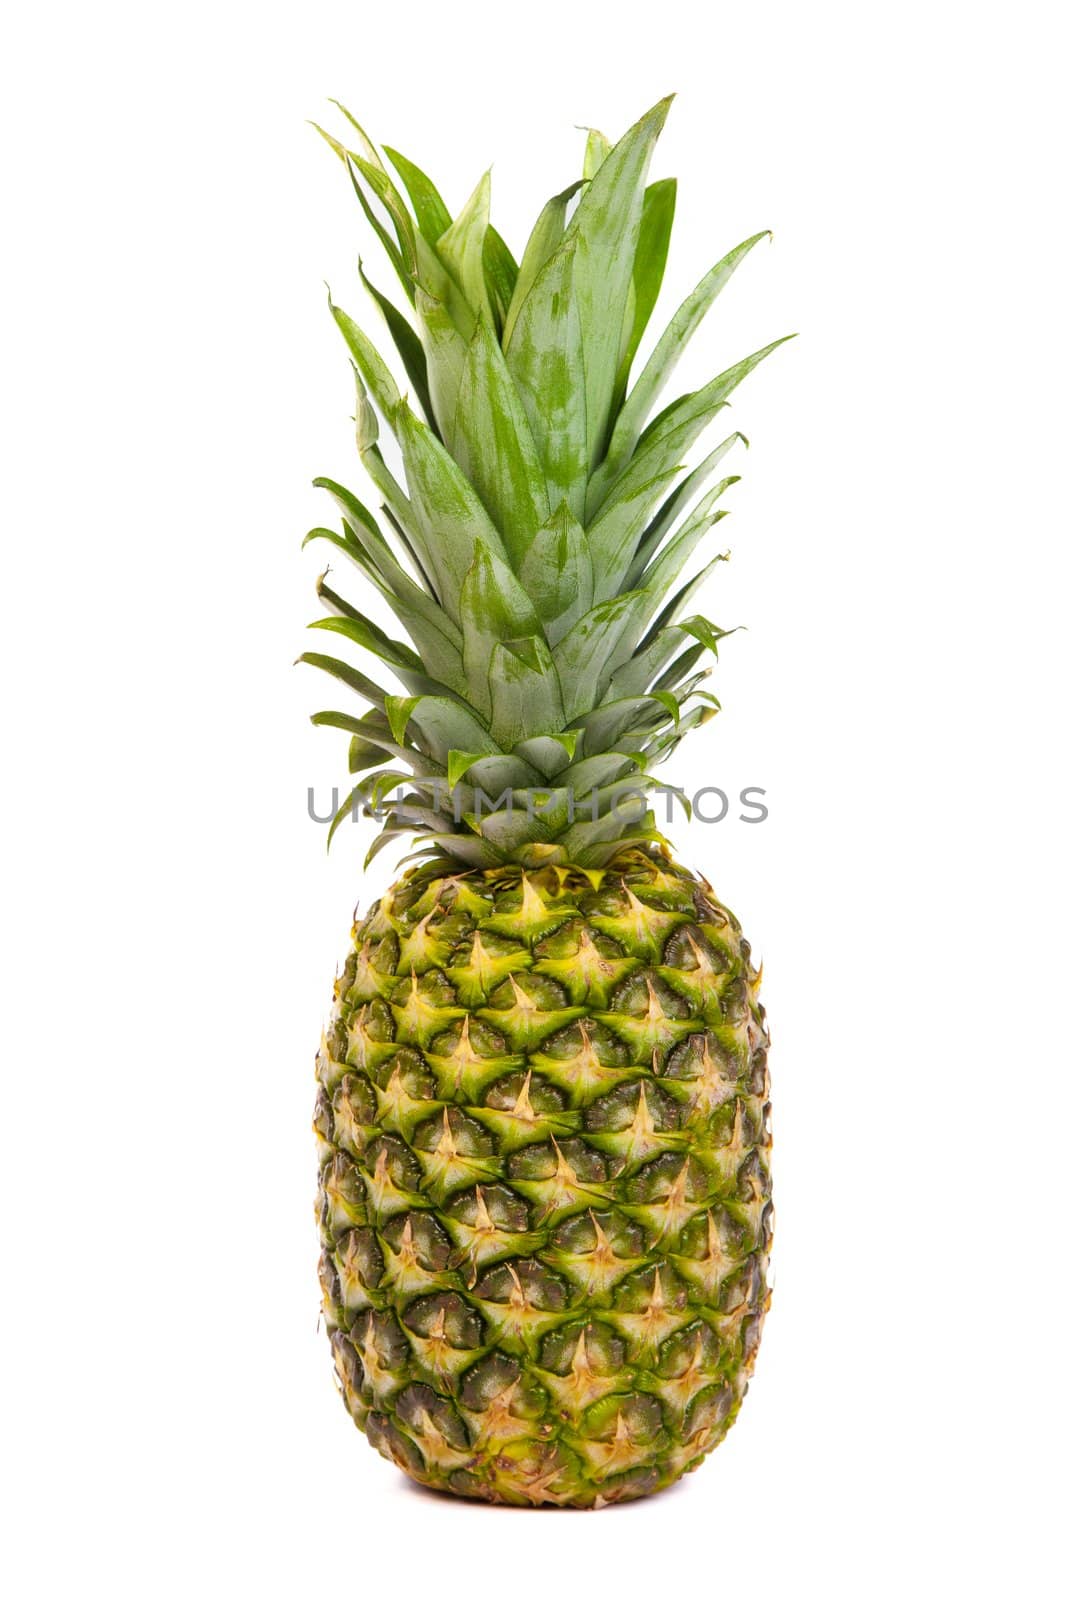 Single pineapple isolated on a white background